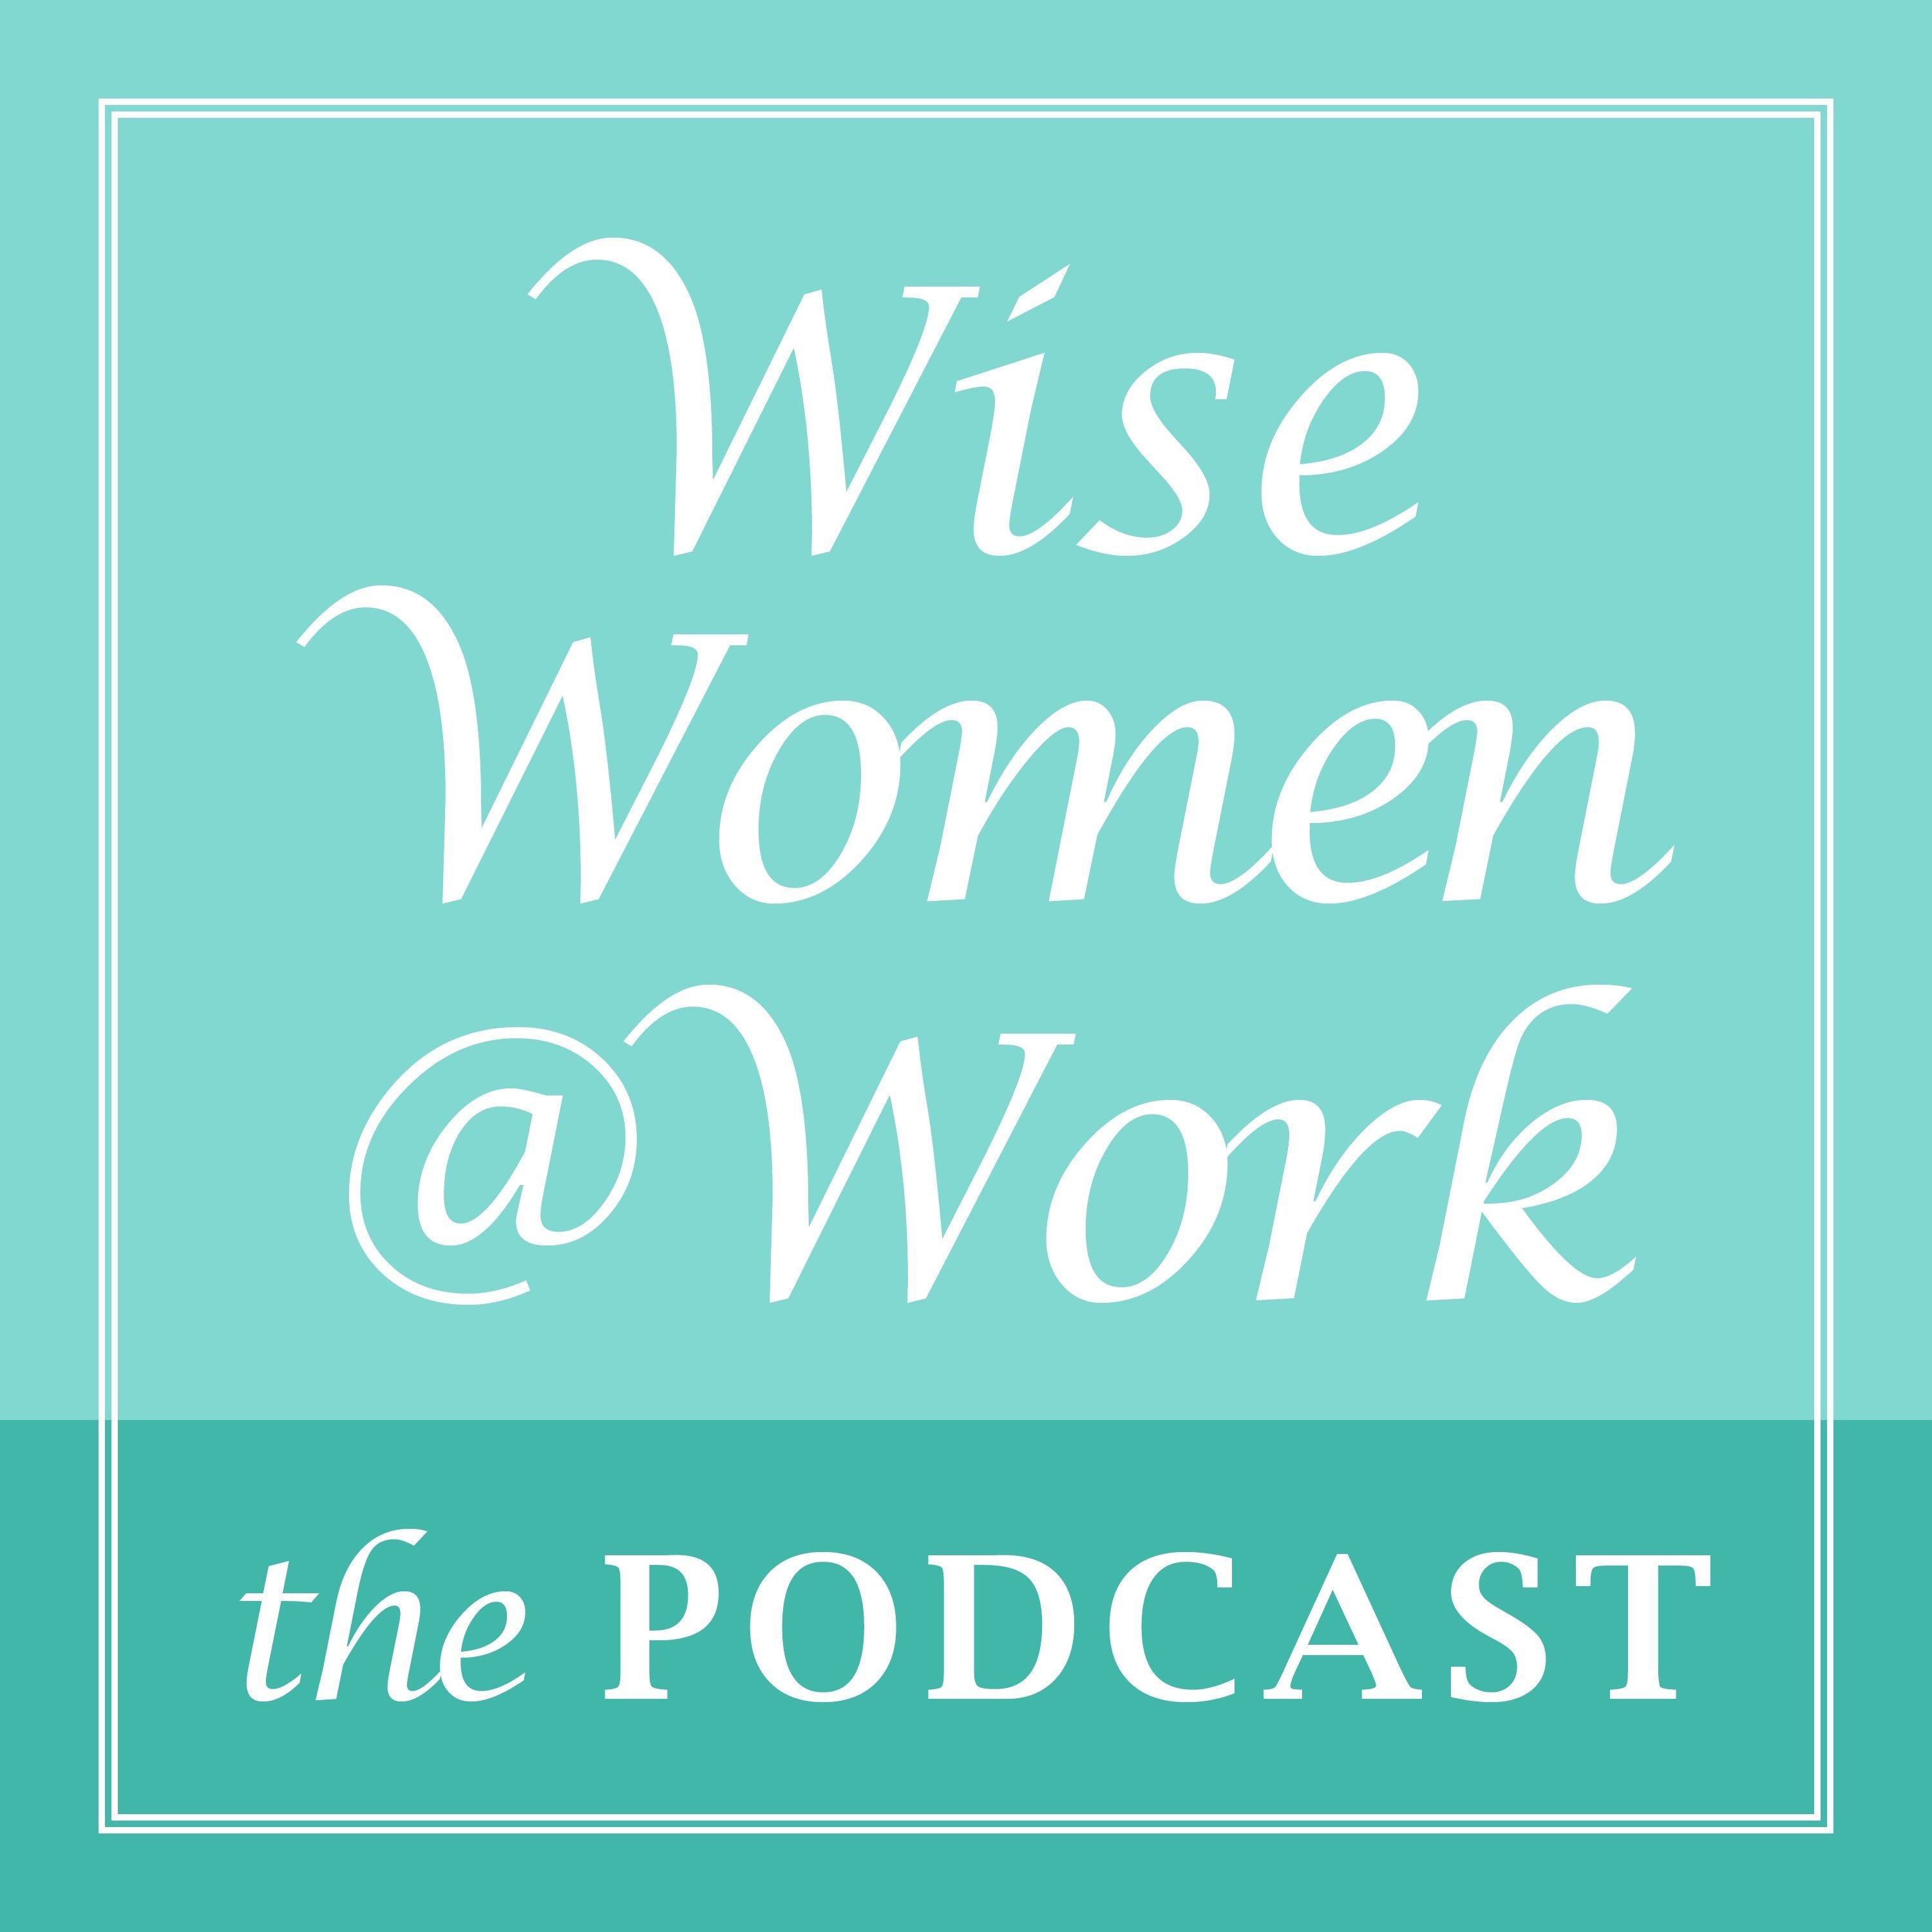 Re-energize your career. Listen to the Podcast. Join the conversation!